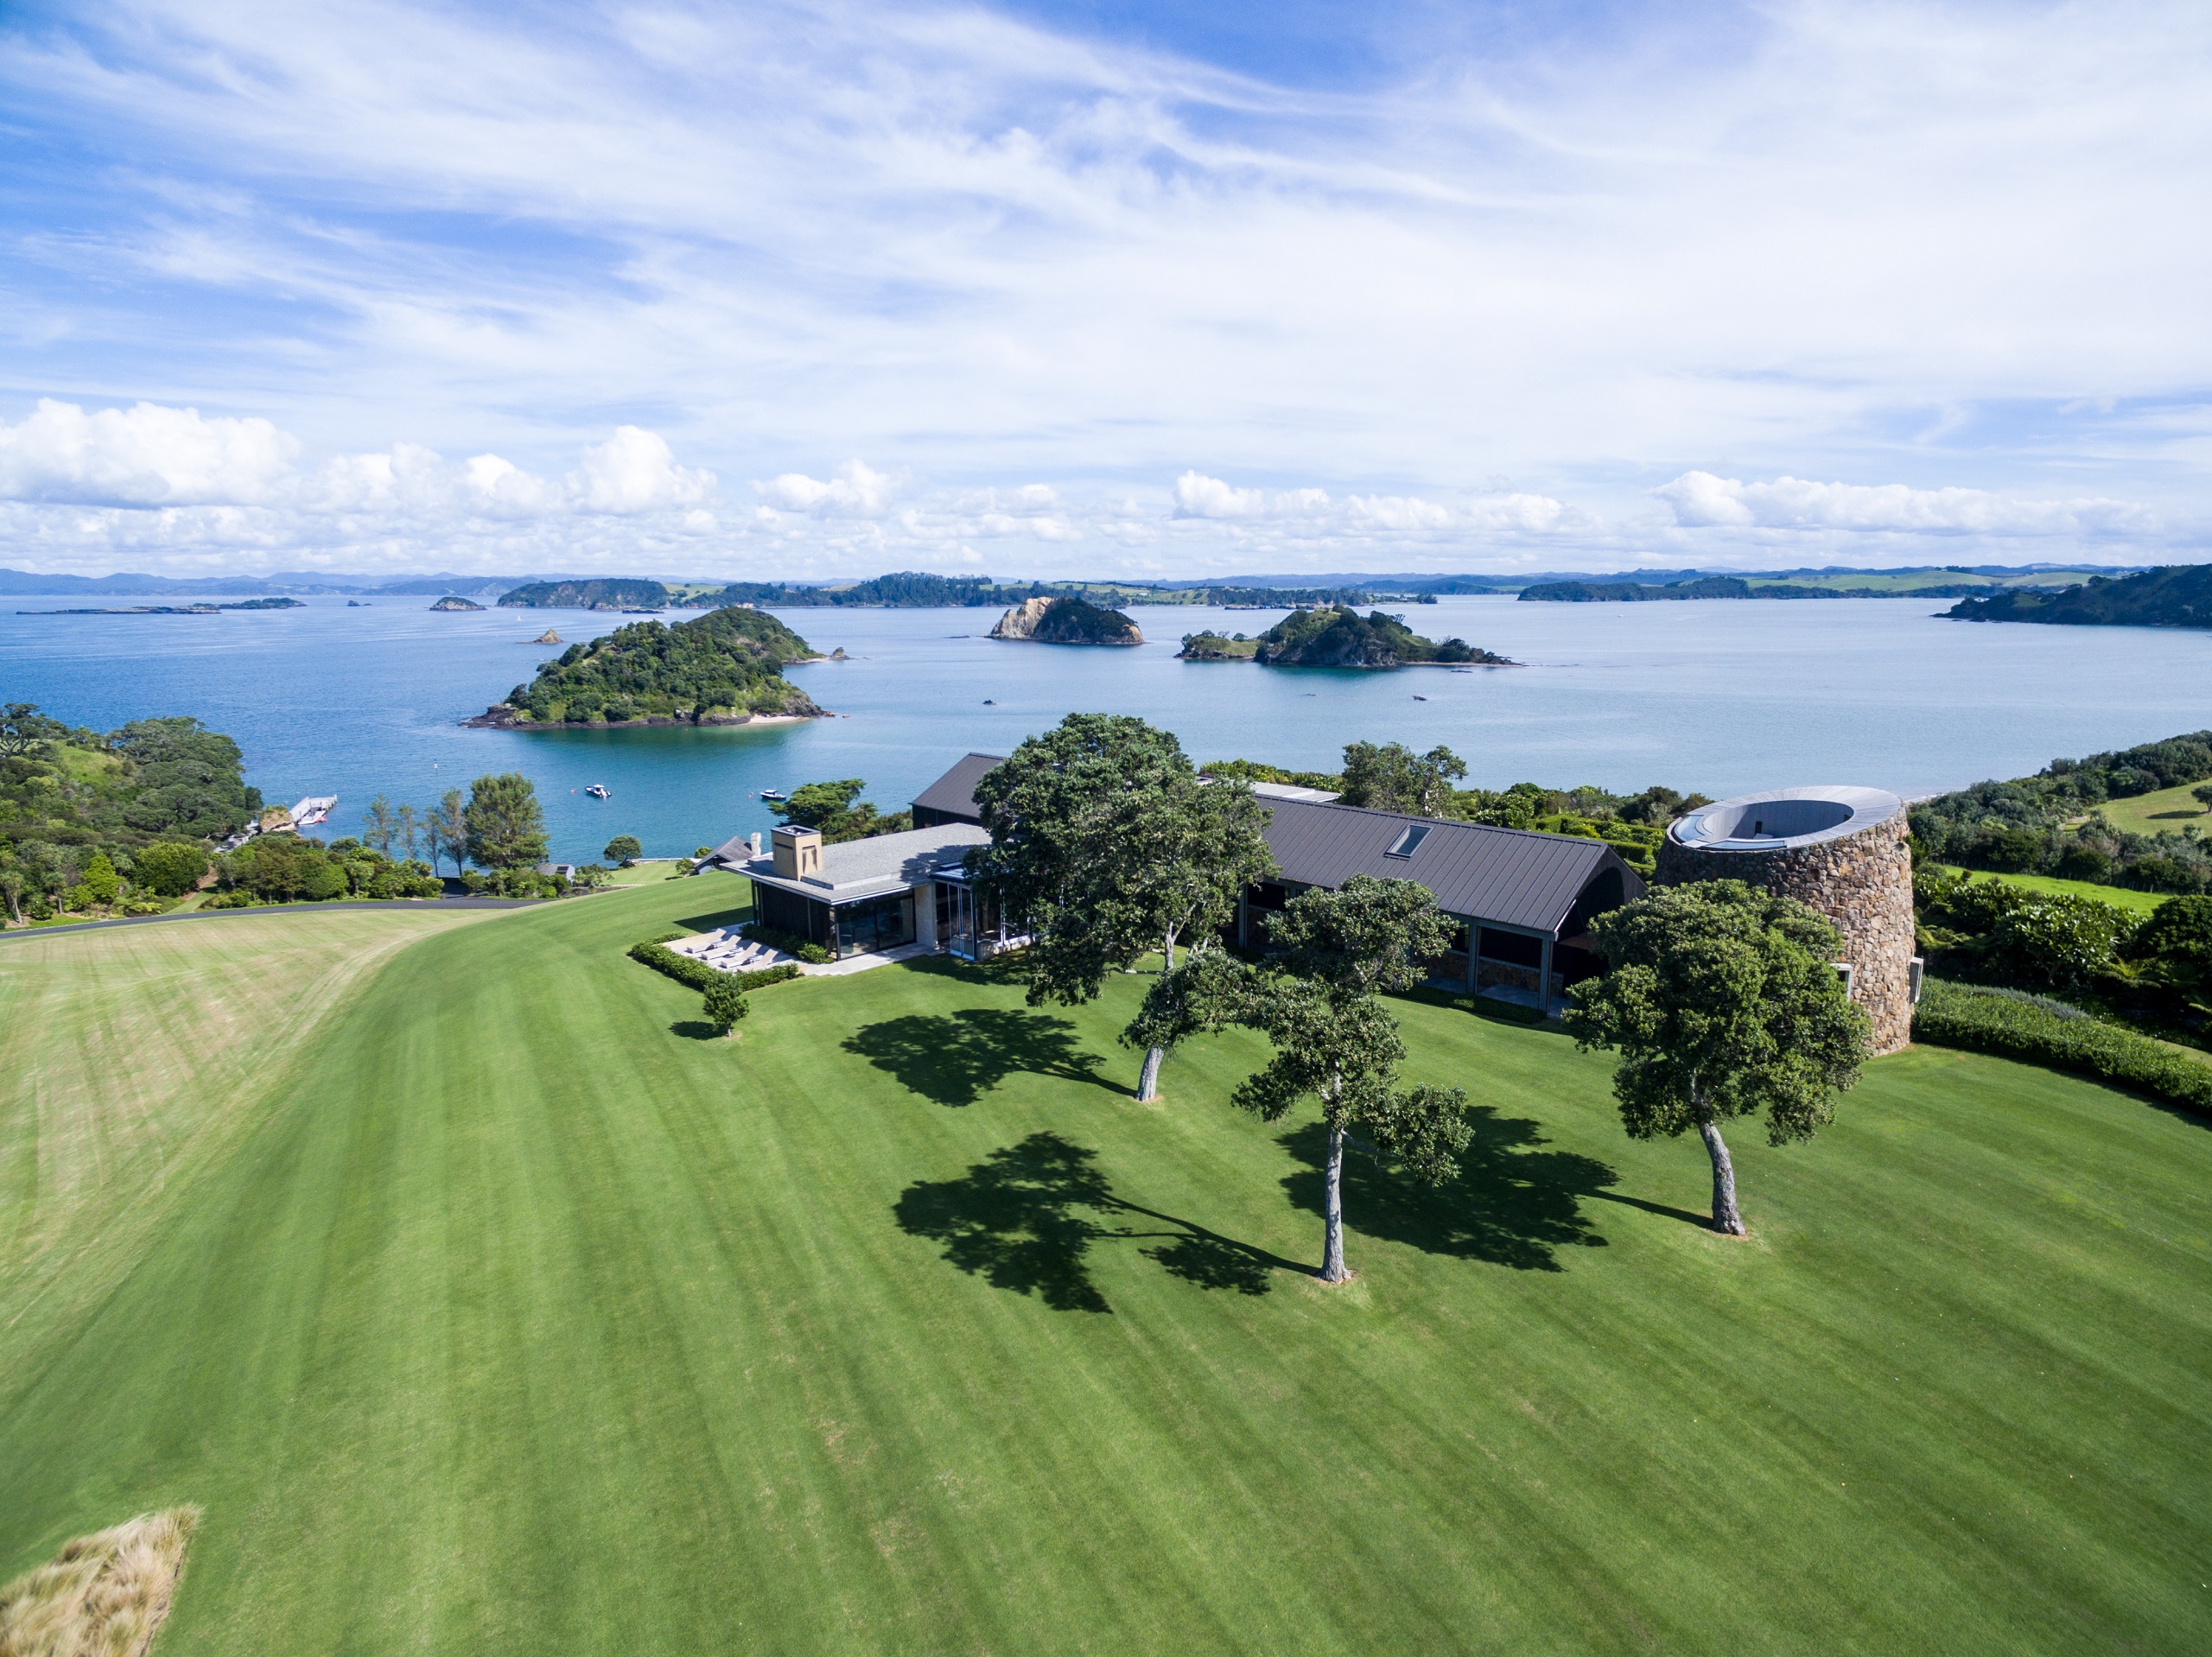 Aerial view of The Landing looking out to the Bay of Islands